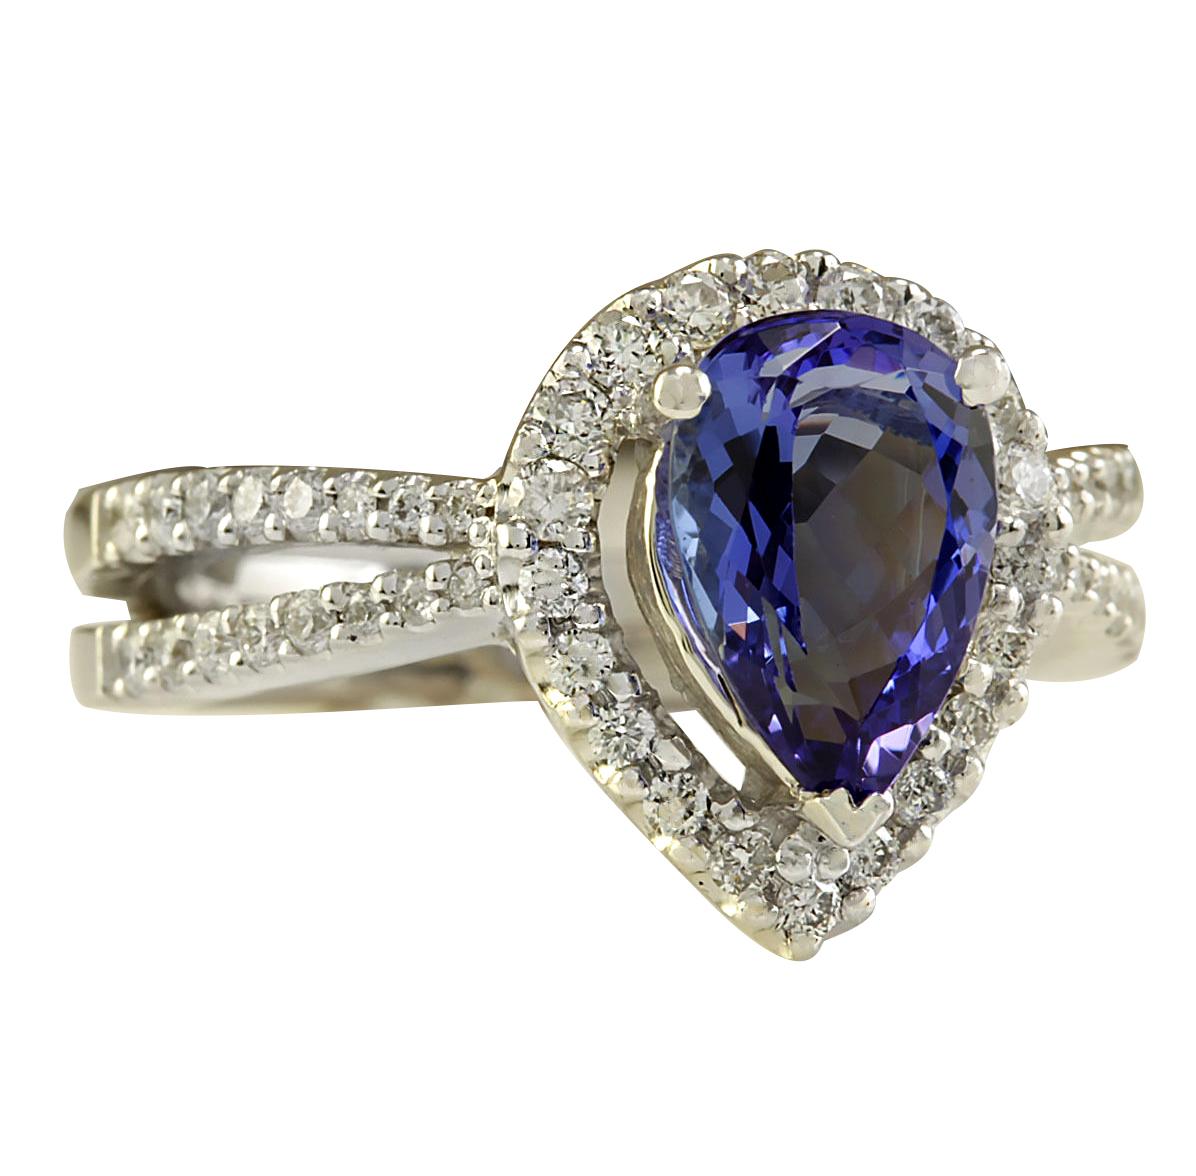 Stamped: 14K White Gold
Total Ring Weight: 6.1 Grams
Total Natural Tanzanite Weight is 1.68 Carat (Measures: 10.00x7.00 mm)
Color: Blue
Total Natural Diamond Weight is 1.26 Carat
Color: F-G, Clarity: VS2-SI1
Face Measures: 13.55x11.85 mm
Sku: